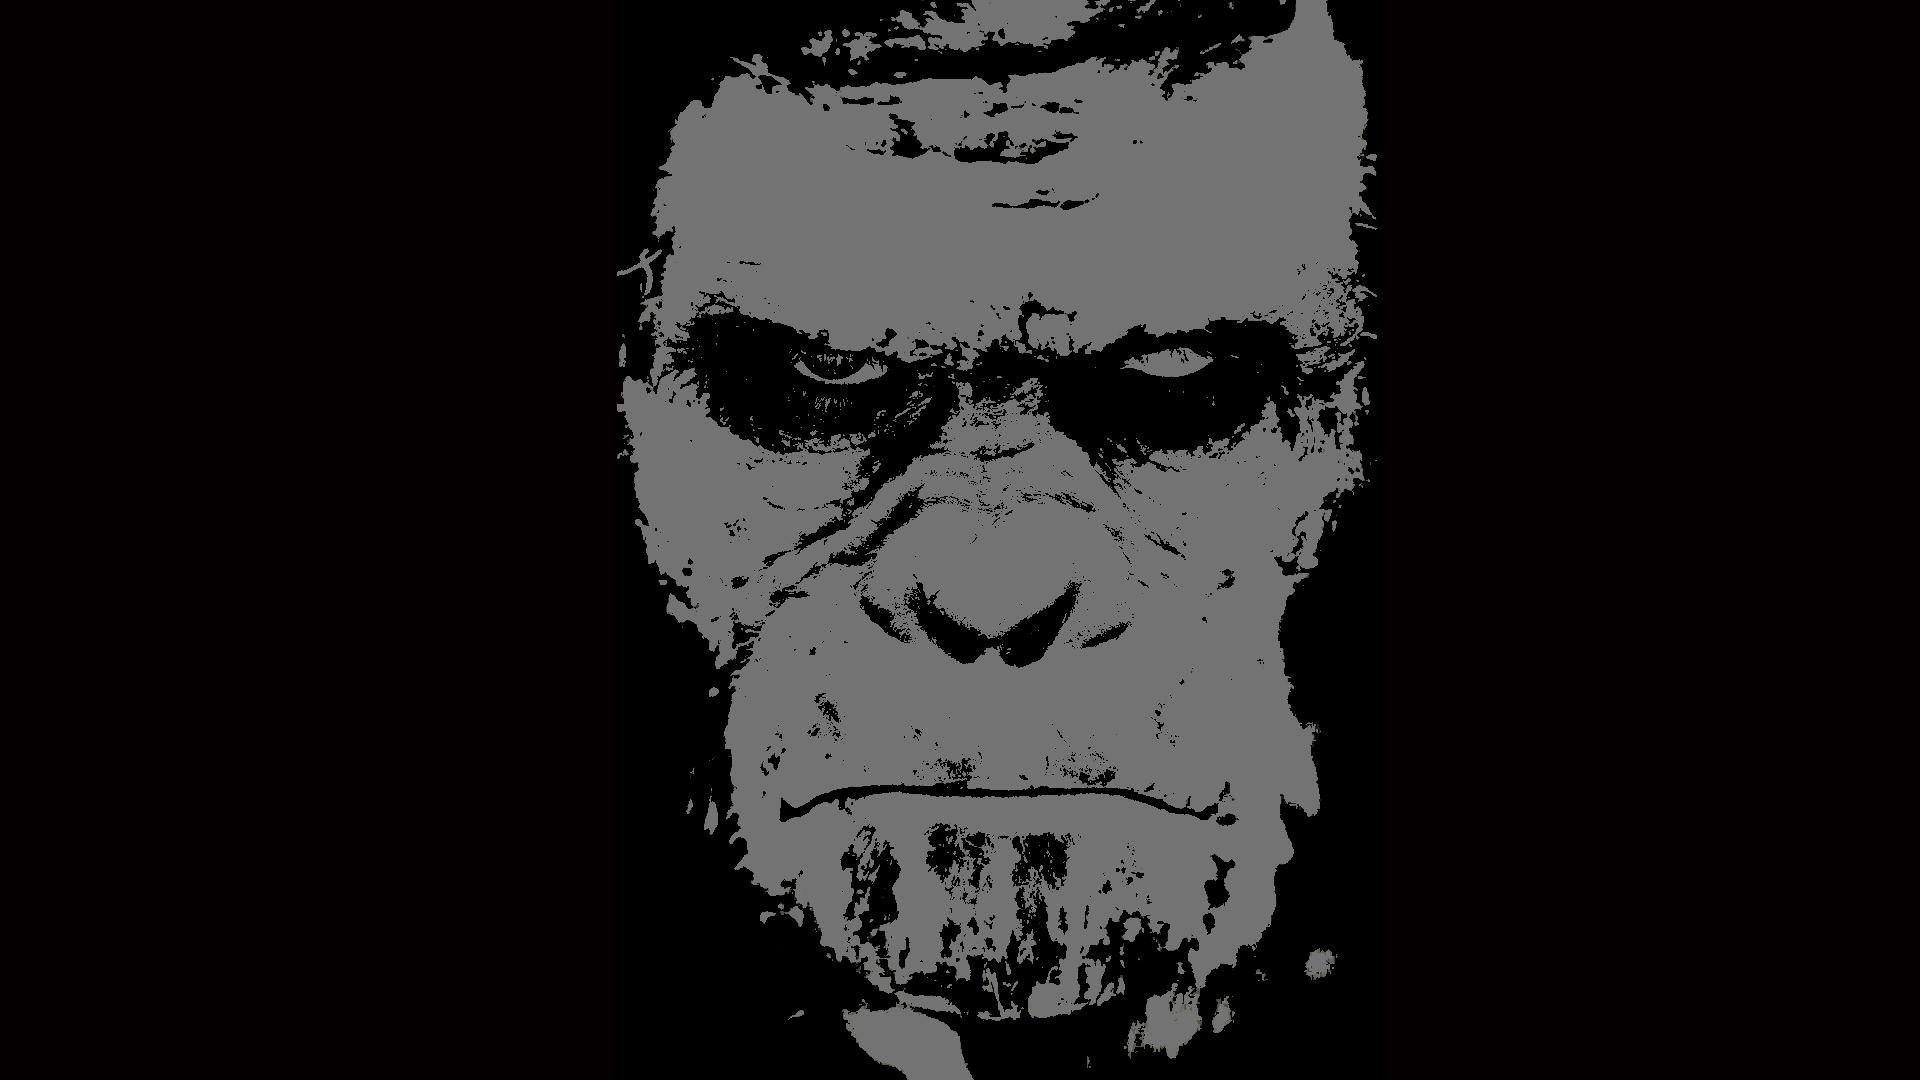 dawn of the apes, Action, Drama, Sci fi, Dawn, Planet, Apes, Monkey, Adventure Wallpaper